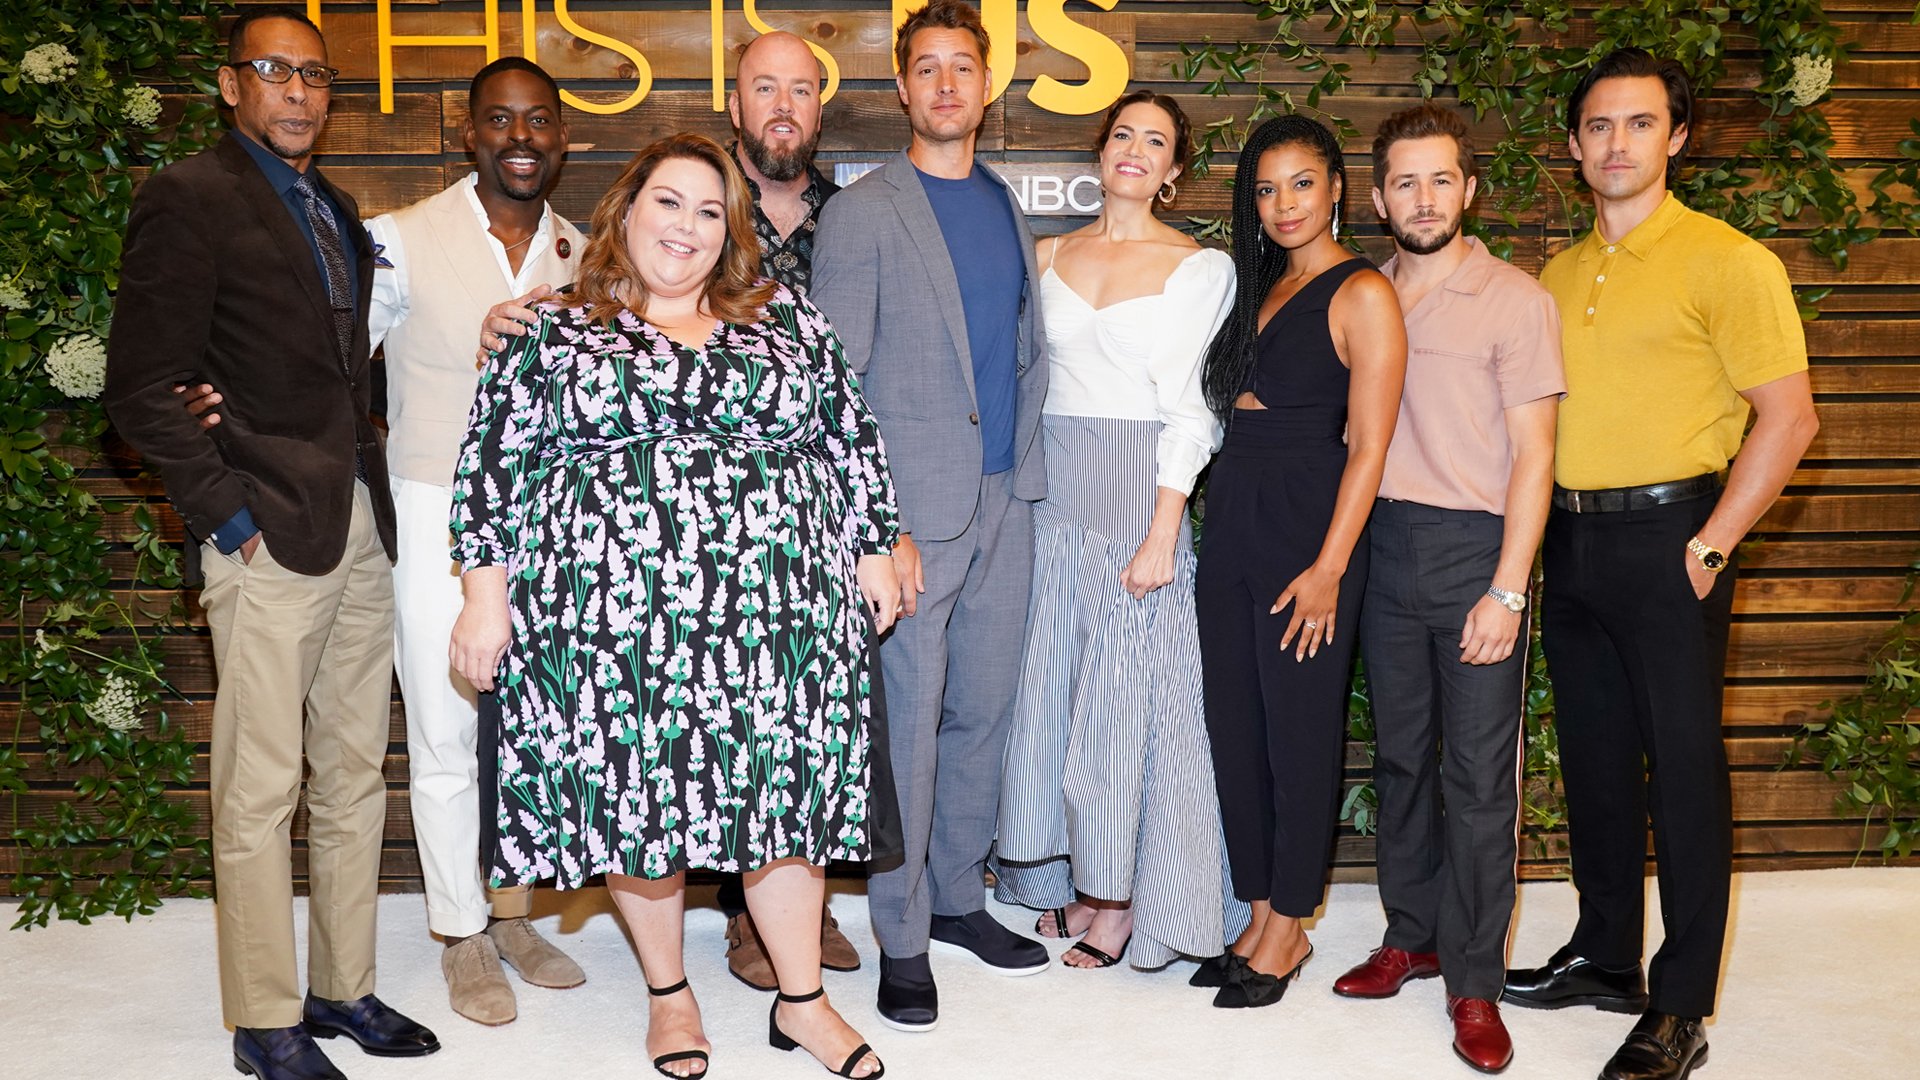 Ron Cephas Jones, Sterling K. Brown, Chrissy Metz, Chris Sullivan, Justin Hartley, Mandy Moore, Susan Kelechi Watson, Michael Angarano, and Milo Ventimiglia attend NBC's "This Is Us" Pancakes with the Pearsons at 1 Hotel West Hollywood on August 10, 2019 in West Hollywood, California.